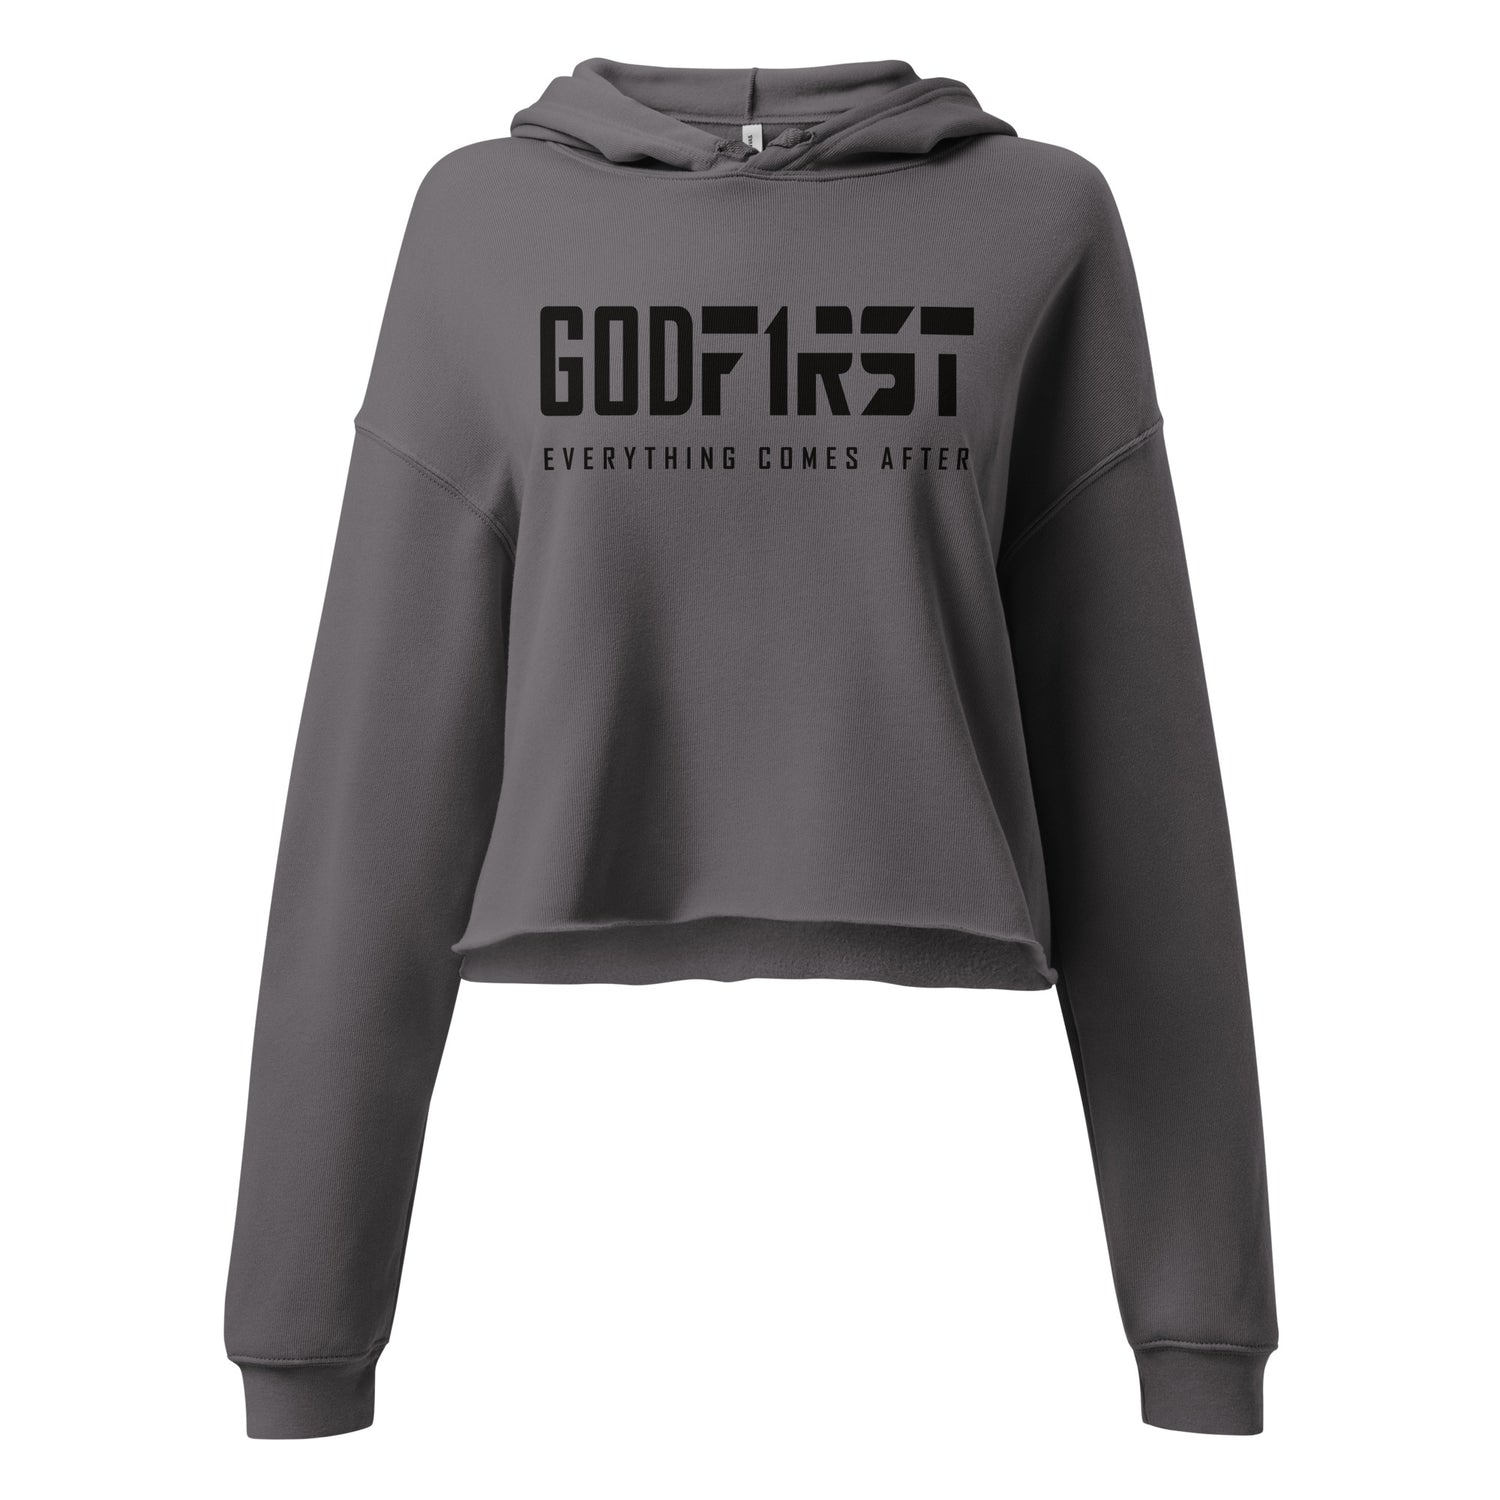 God First Cropped Hoodie